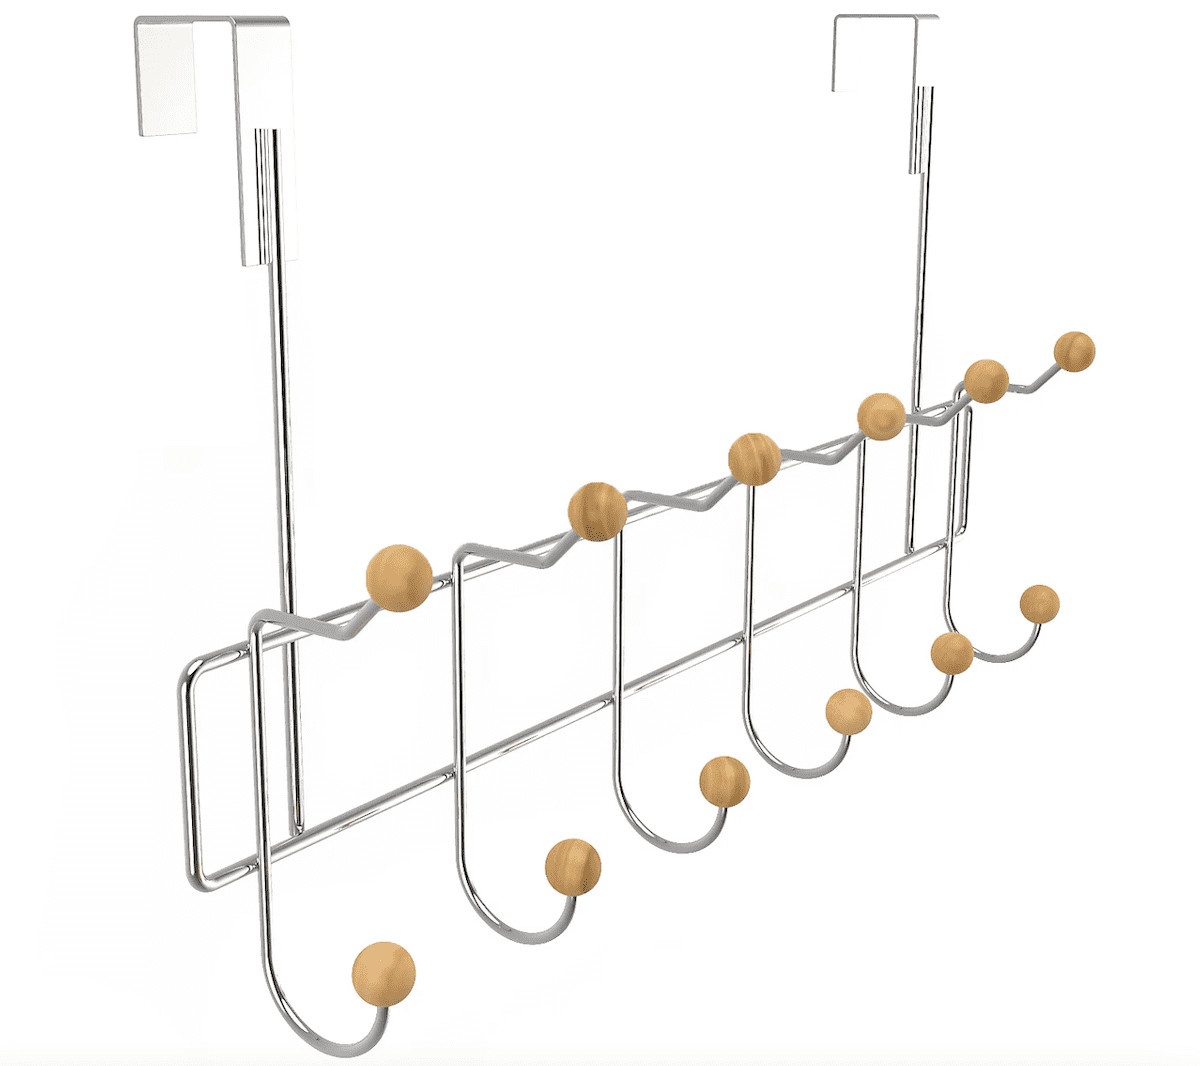 http://cdn.apartmenttherapy.info/image/upload/v1651500685/at/product%20listing/Lavish_Home_Over_the_Door_Organizer_Rack.png